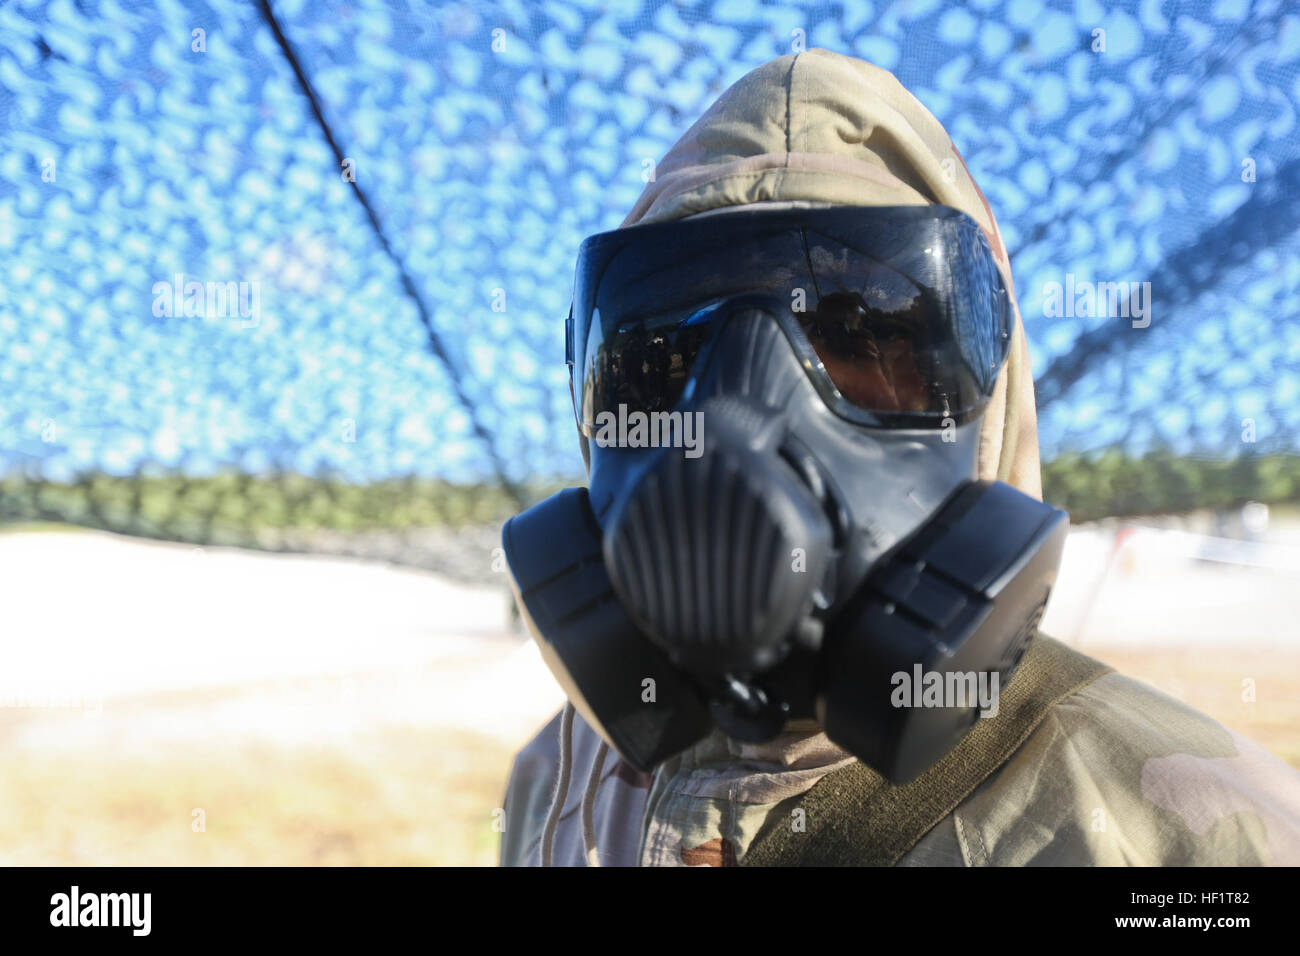 U.S. Marine Corps Sgt. Garret Arrieta, a chemical, biological, radiological, nuclear defense (CBRND) specialist with Marine Aircraft Group 12 poses with an M50 gas mask as part of a CBRND training exercise on North Field, Tinian, Northern Mariana Islands during exercise Forager Fury II, Dec. 3, 2013. This CBRND exercise is used to train Marines on the procedures of how to act and react in a contaminated environment. (U.S. Marine Corps photo by Lance Cpl. Austin Schlosser/Released) Forager Fury II 131203-M-MP631-028 Stock Photo